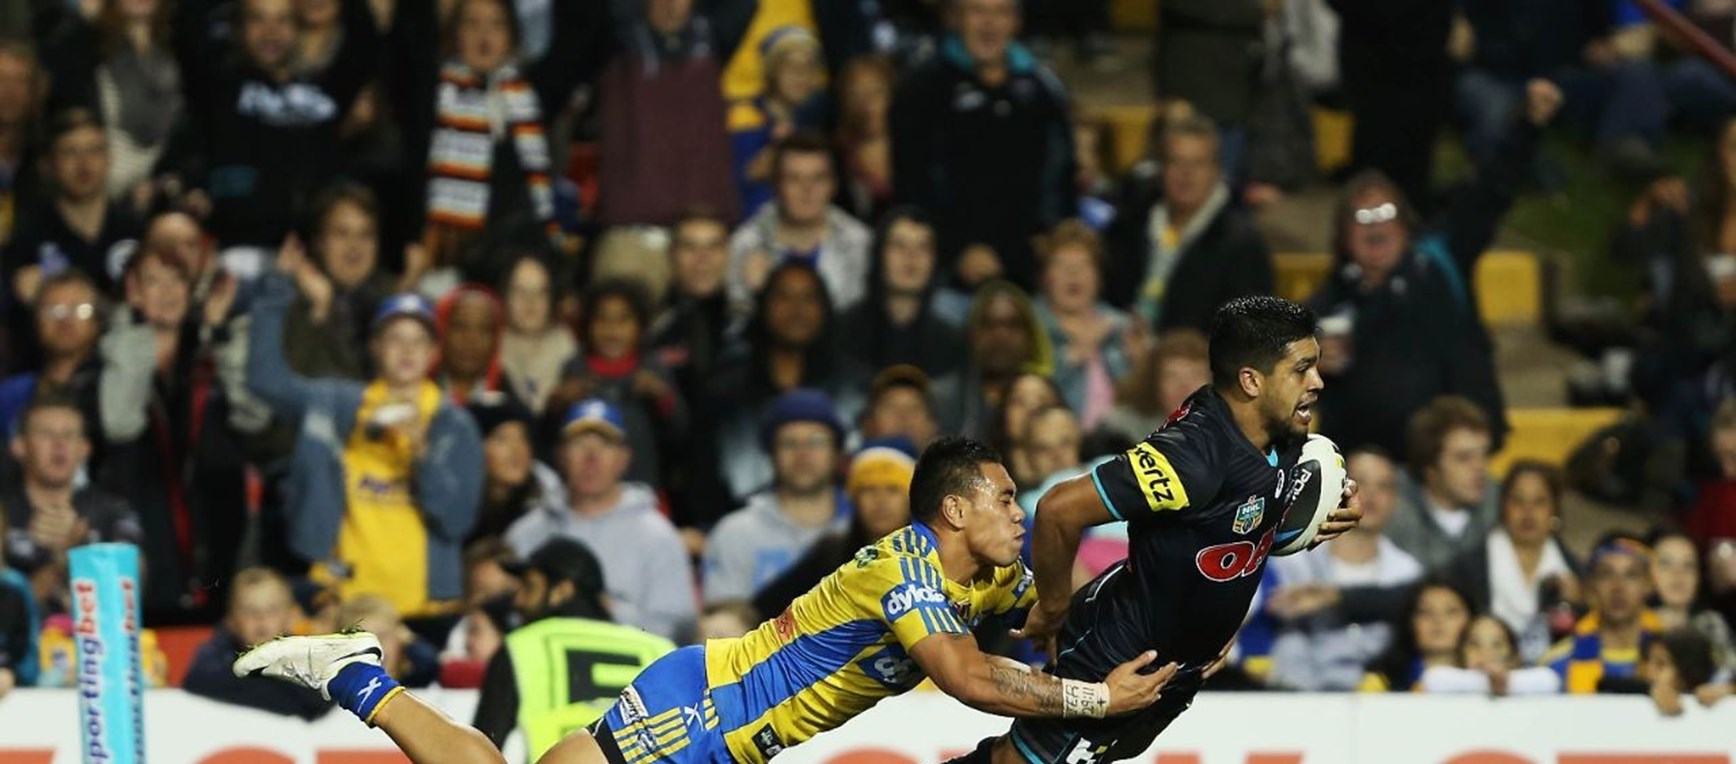 Panthers vs Eels Photo Gallery